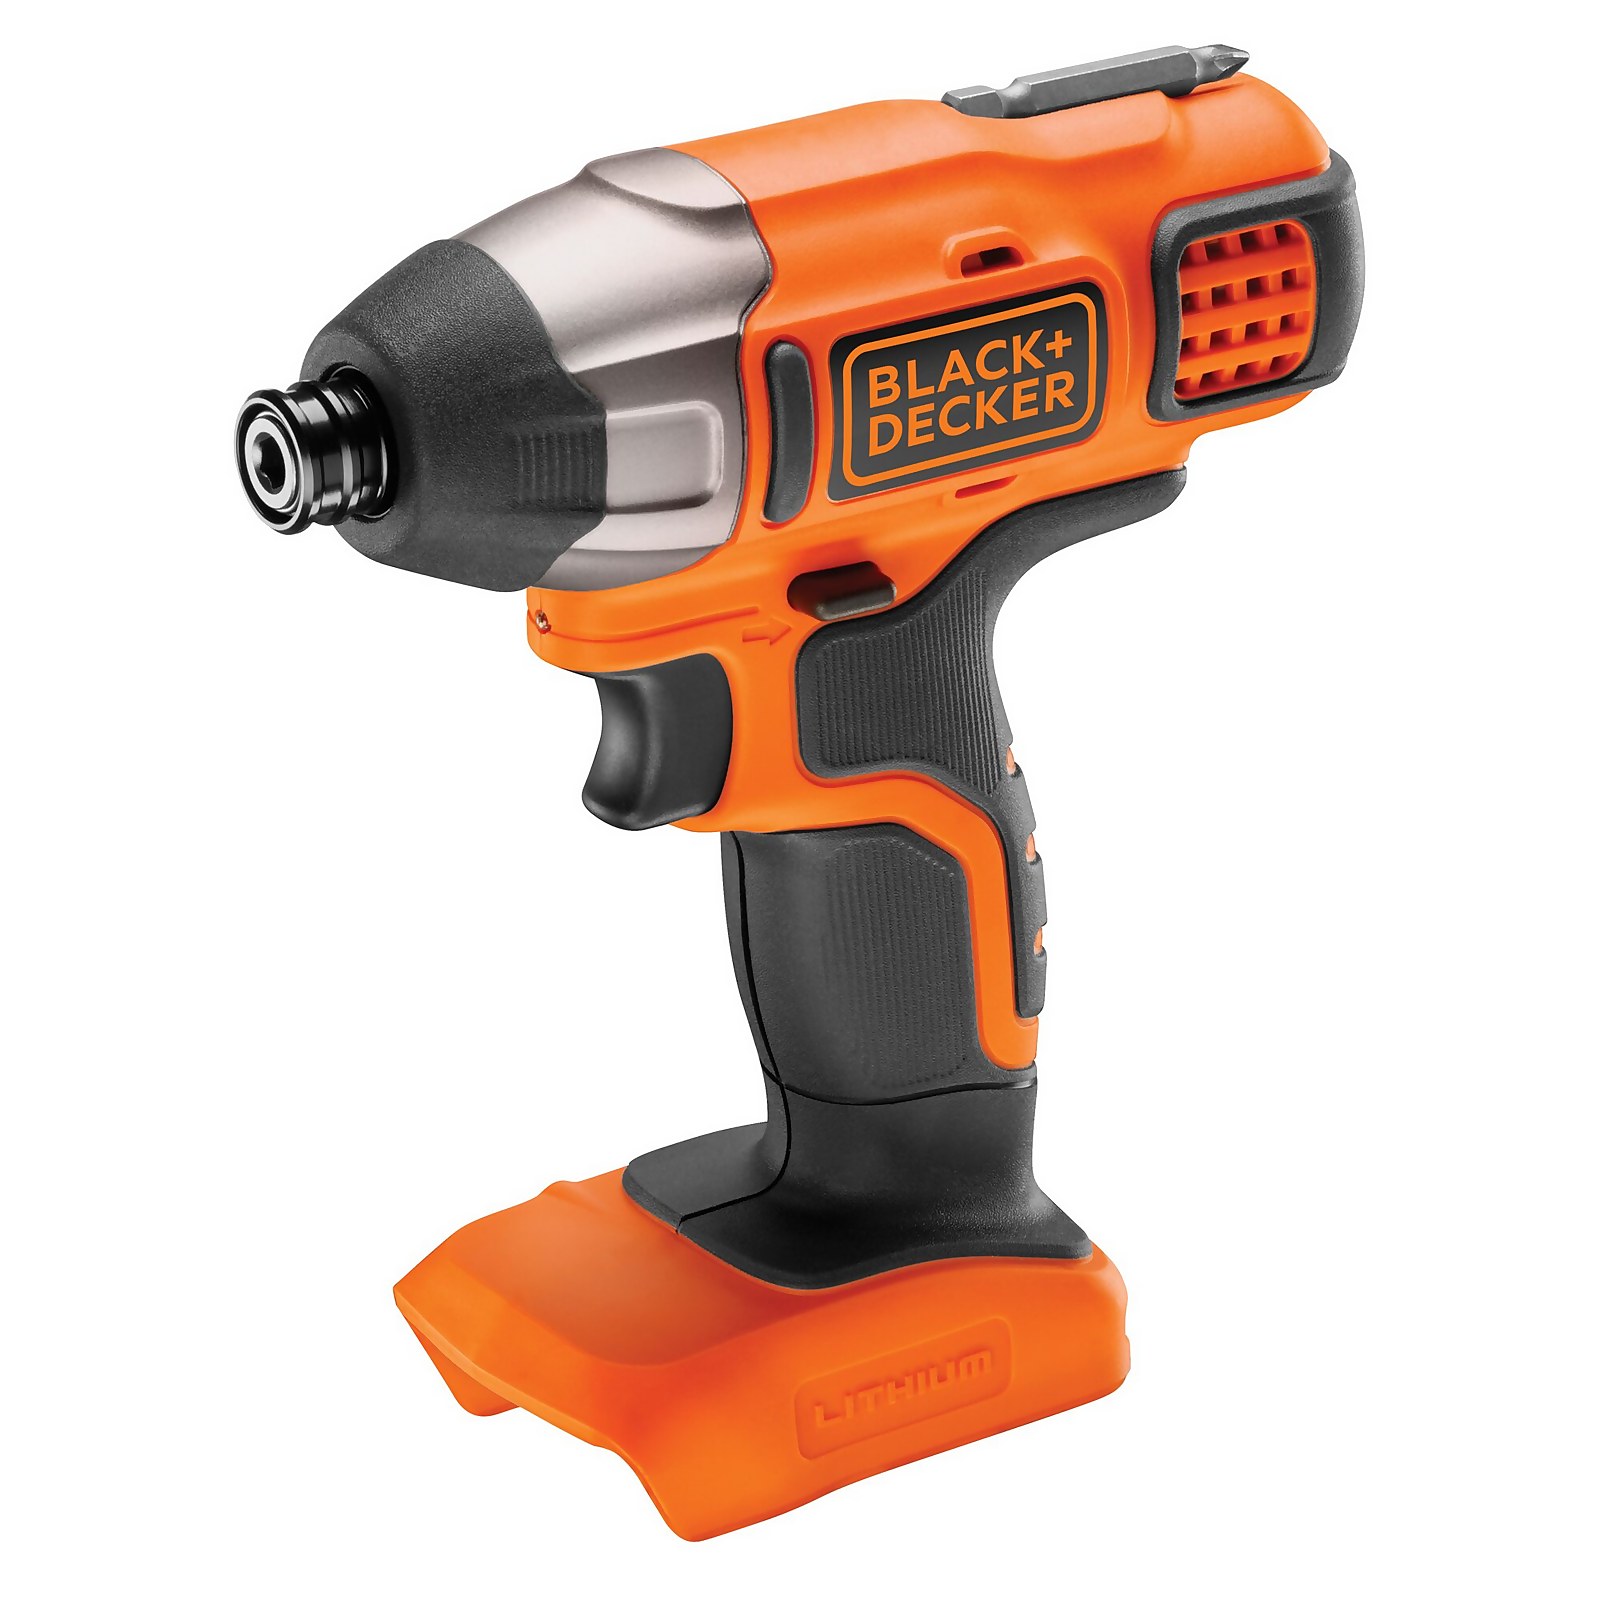 Photo of Black+decker 18v Cordless Impact Driver With Screwdriver Bit -no Battery Included- -bdcim18n-xj-